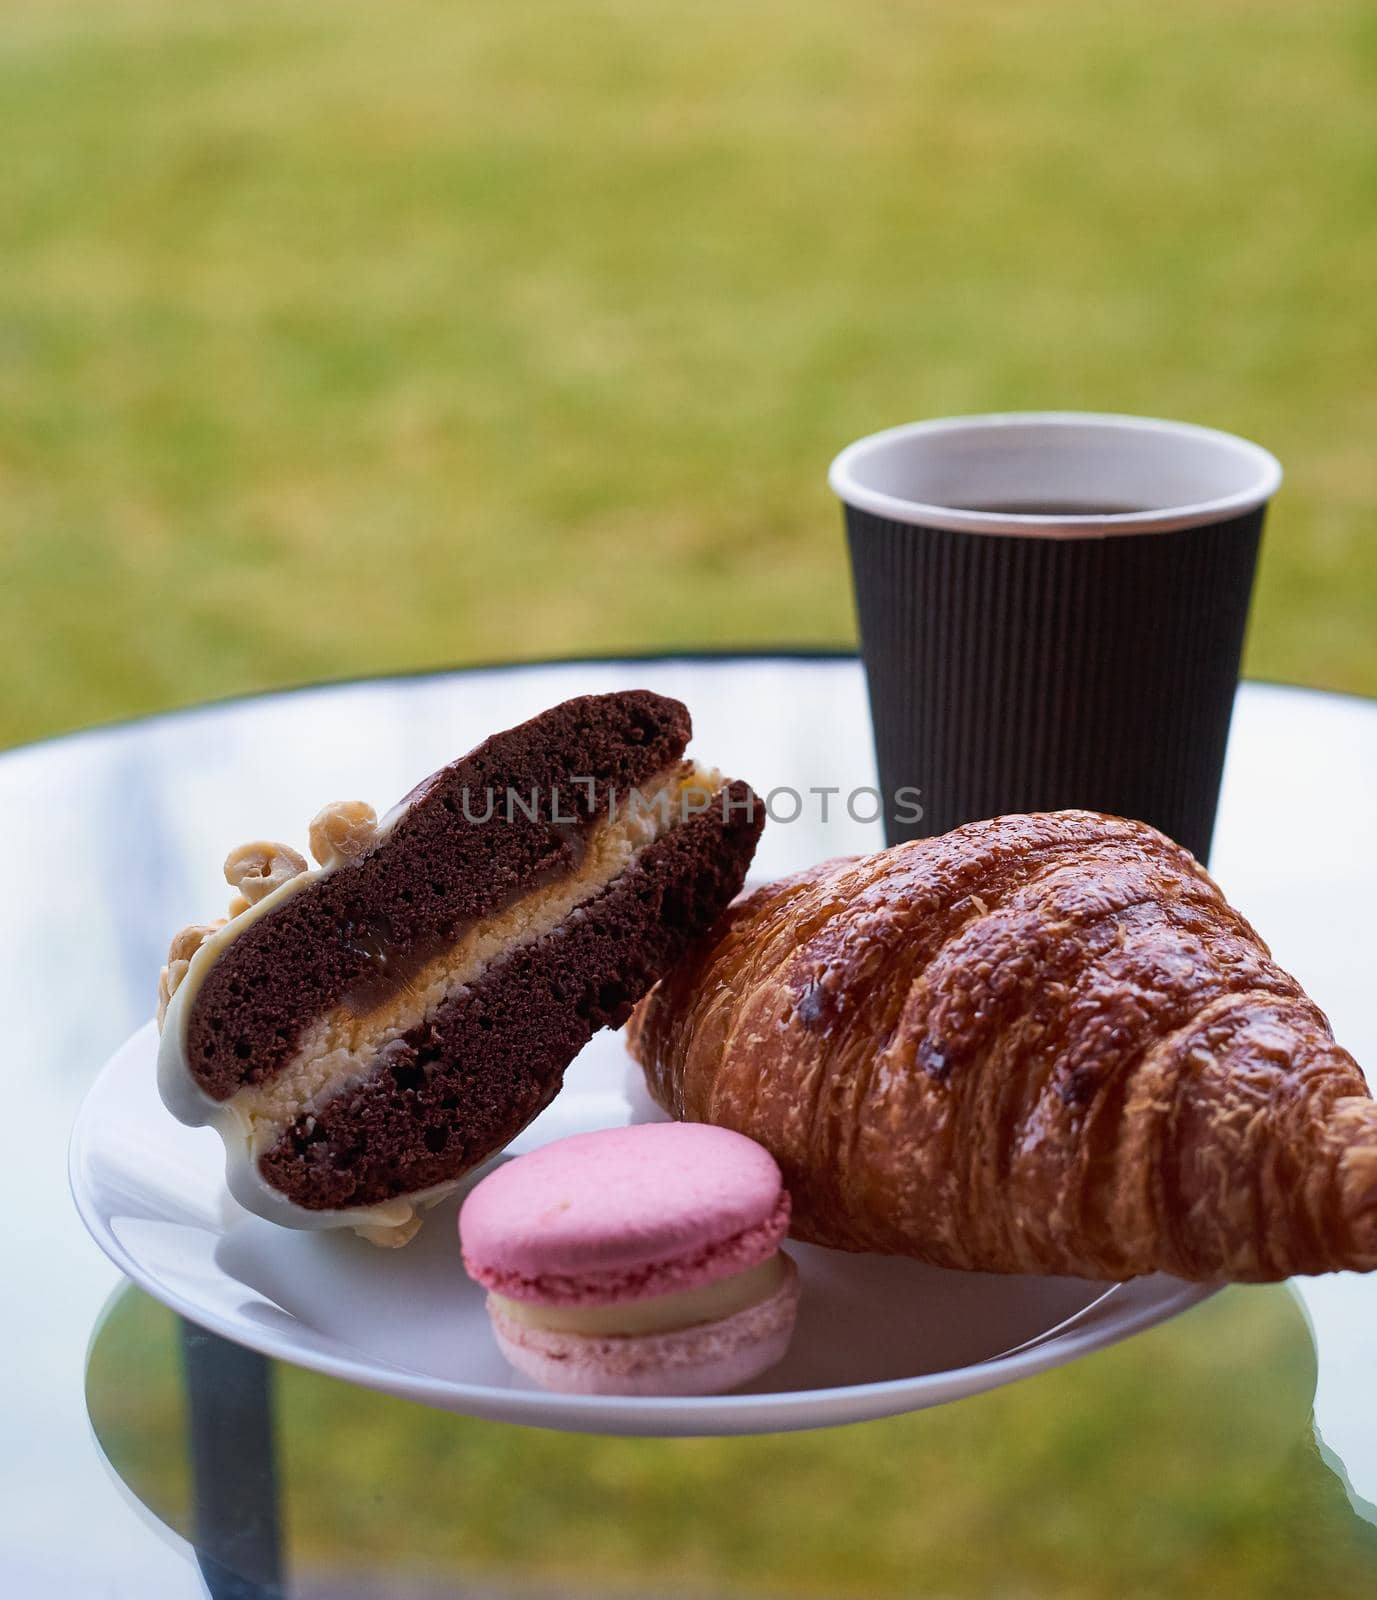 Breakfast with croissant and dessert, coffee or tea in plastic mug, in the village by NataBene